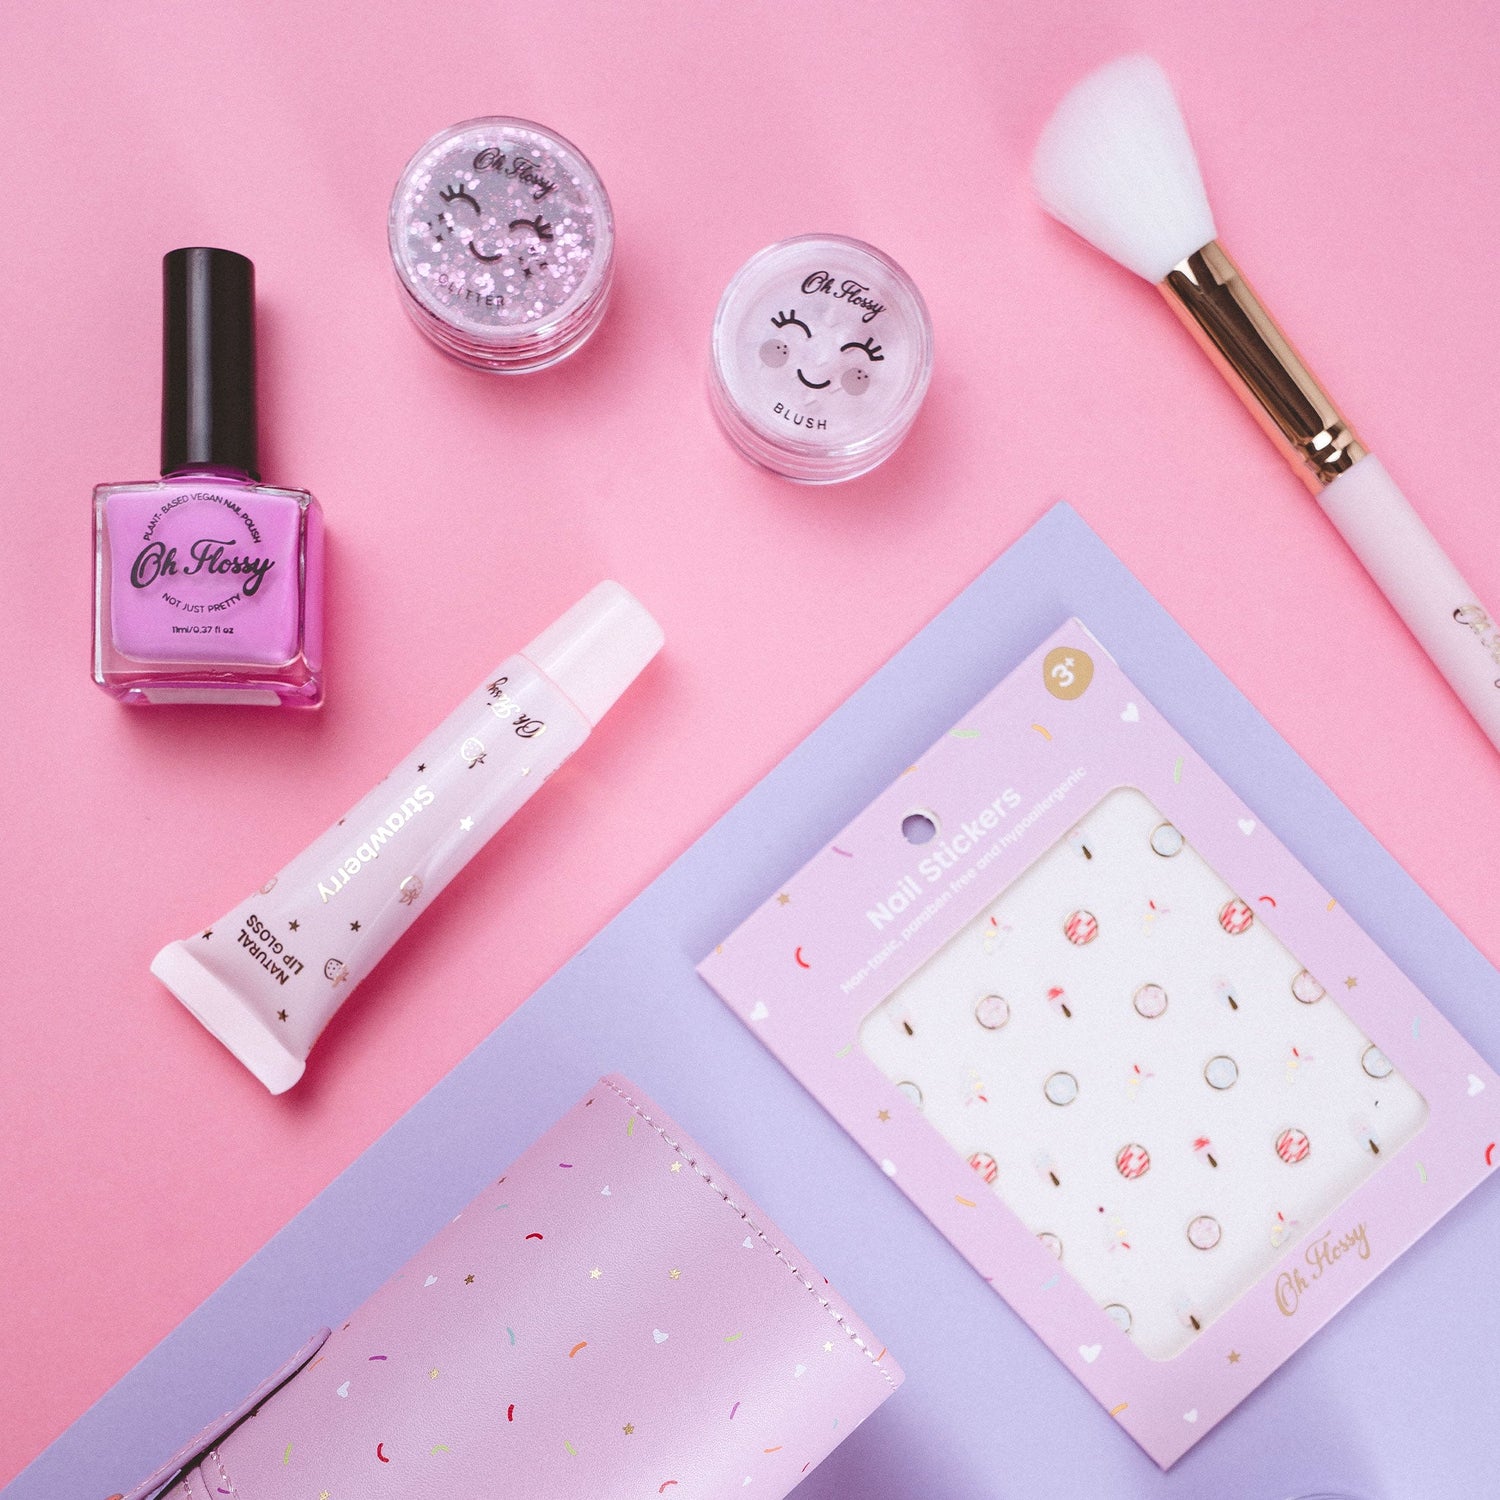 OH FLOSSY | NAIL STICKERS Sweets by OH FLOSSY - The Playful Collective